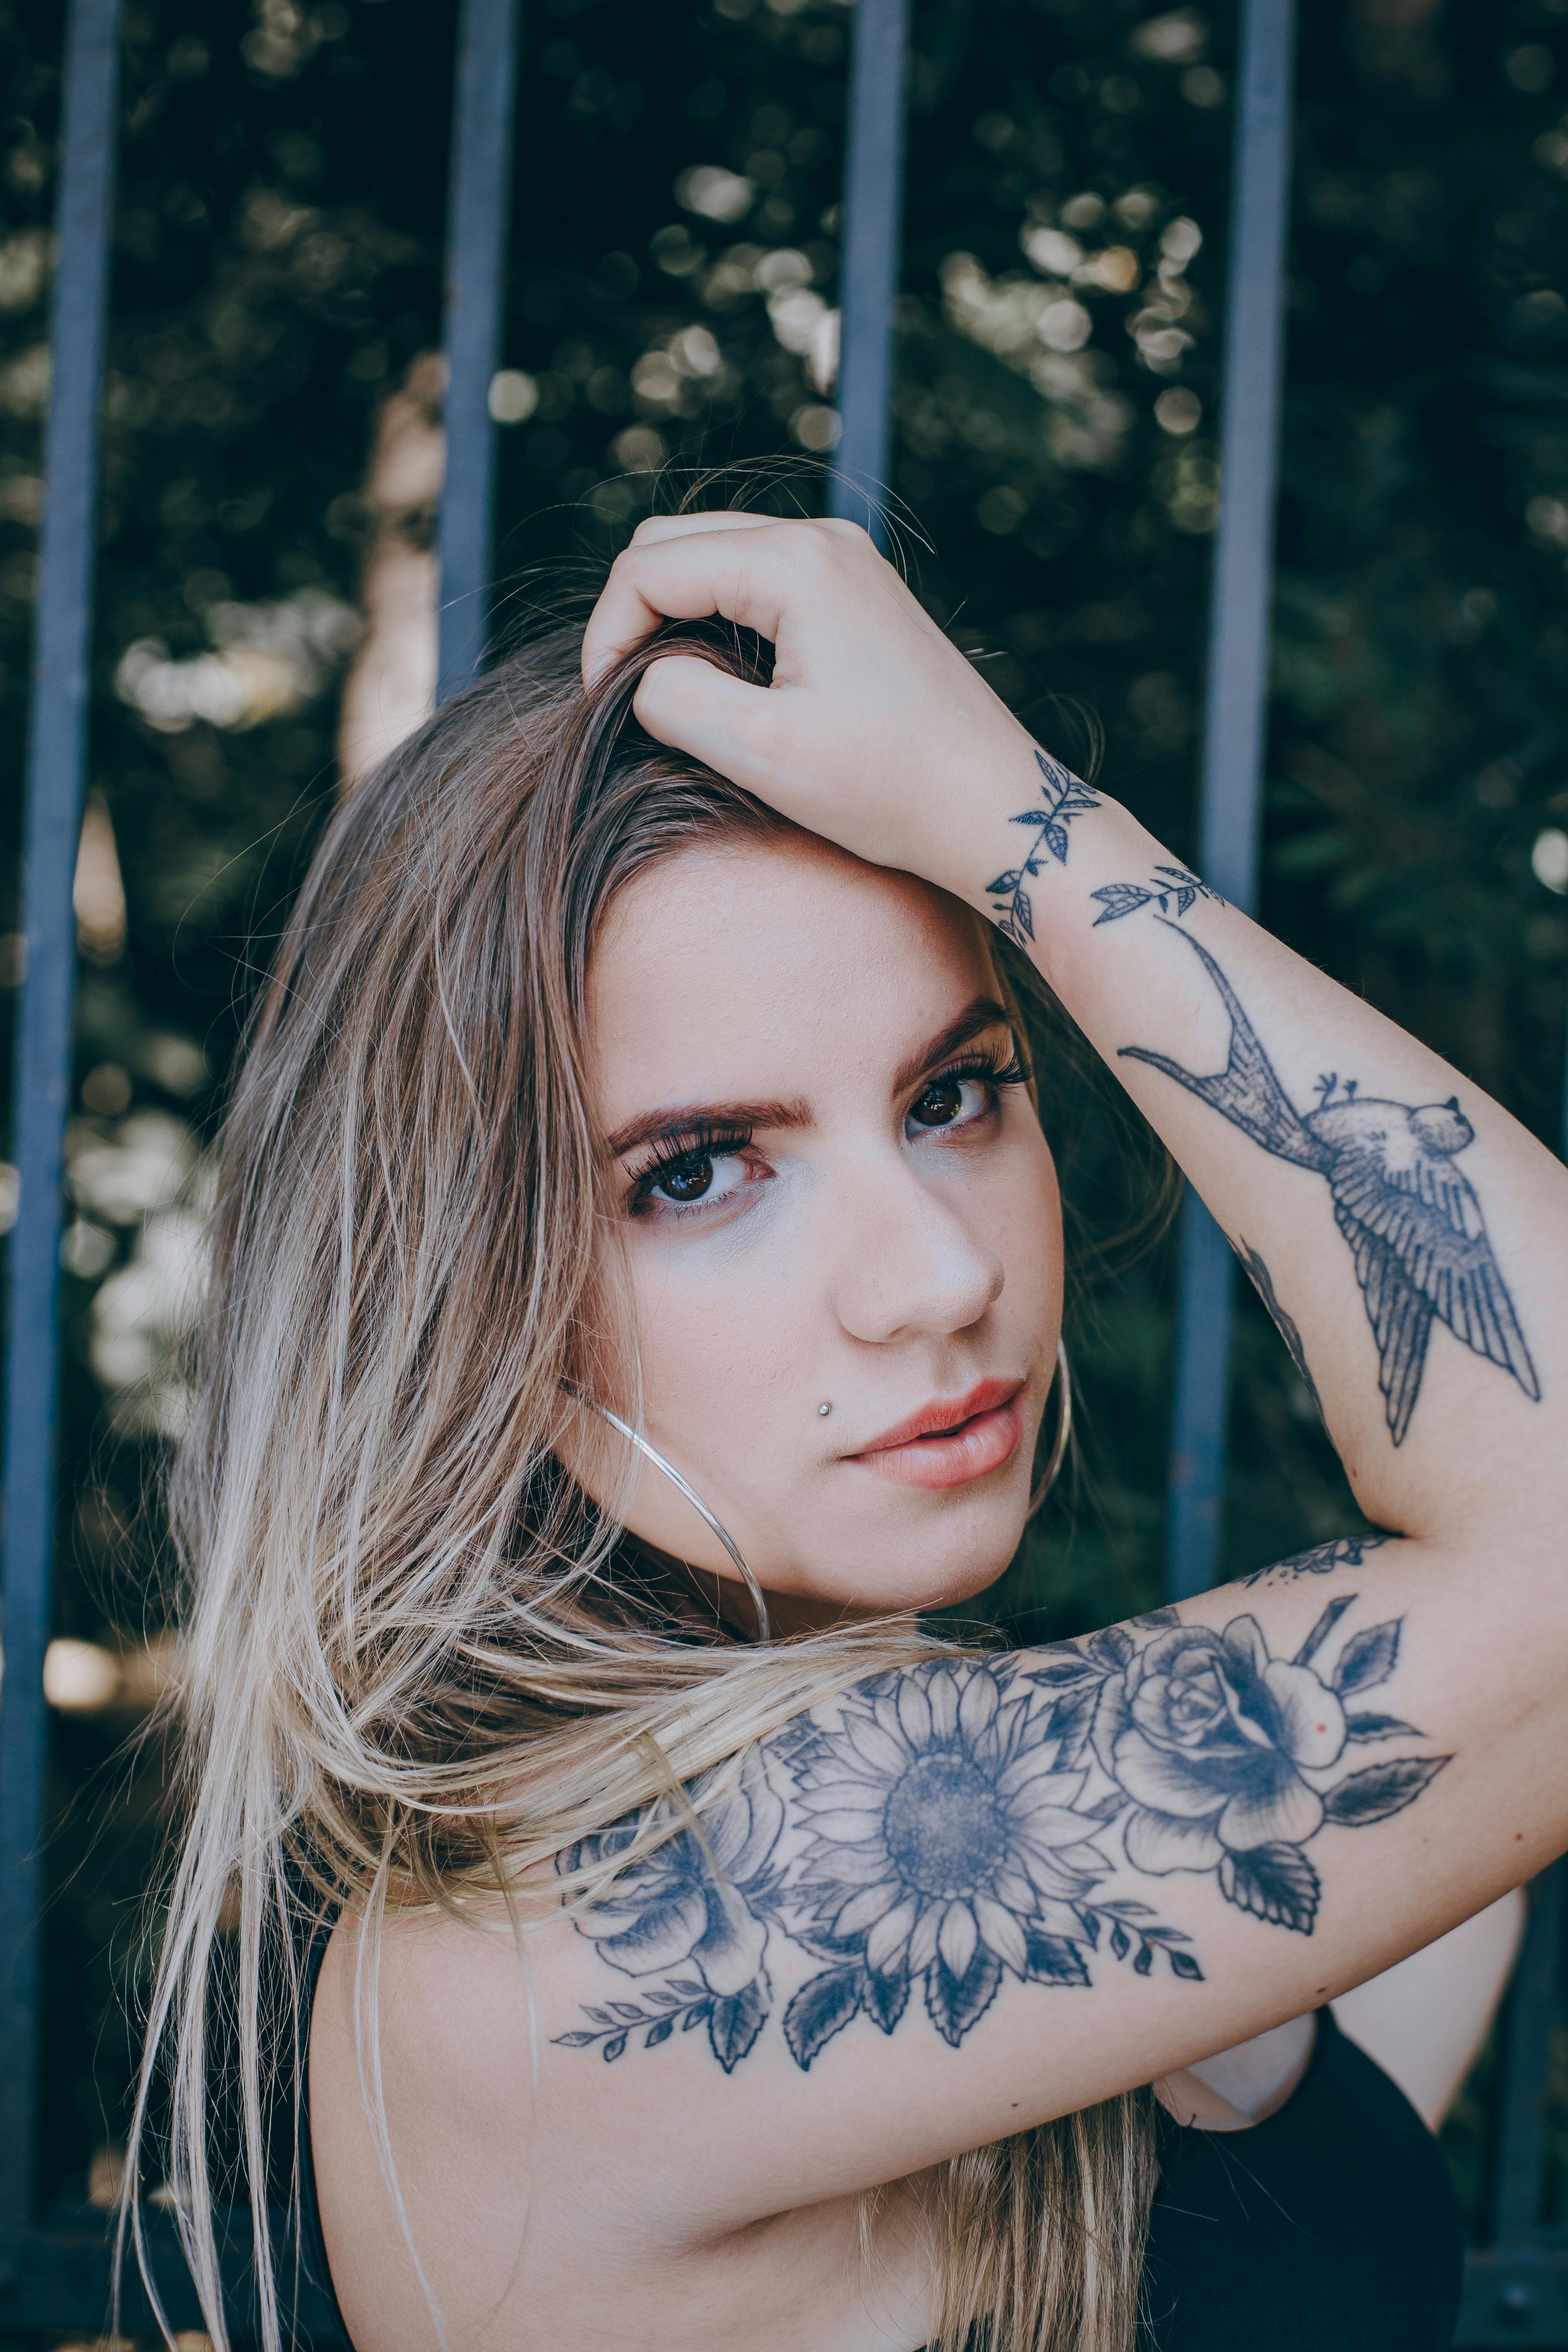 The Sticker Sleeve Tattoo Is The Latest 'Cool Girl' Ink Trend